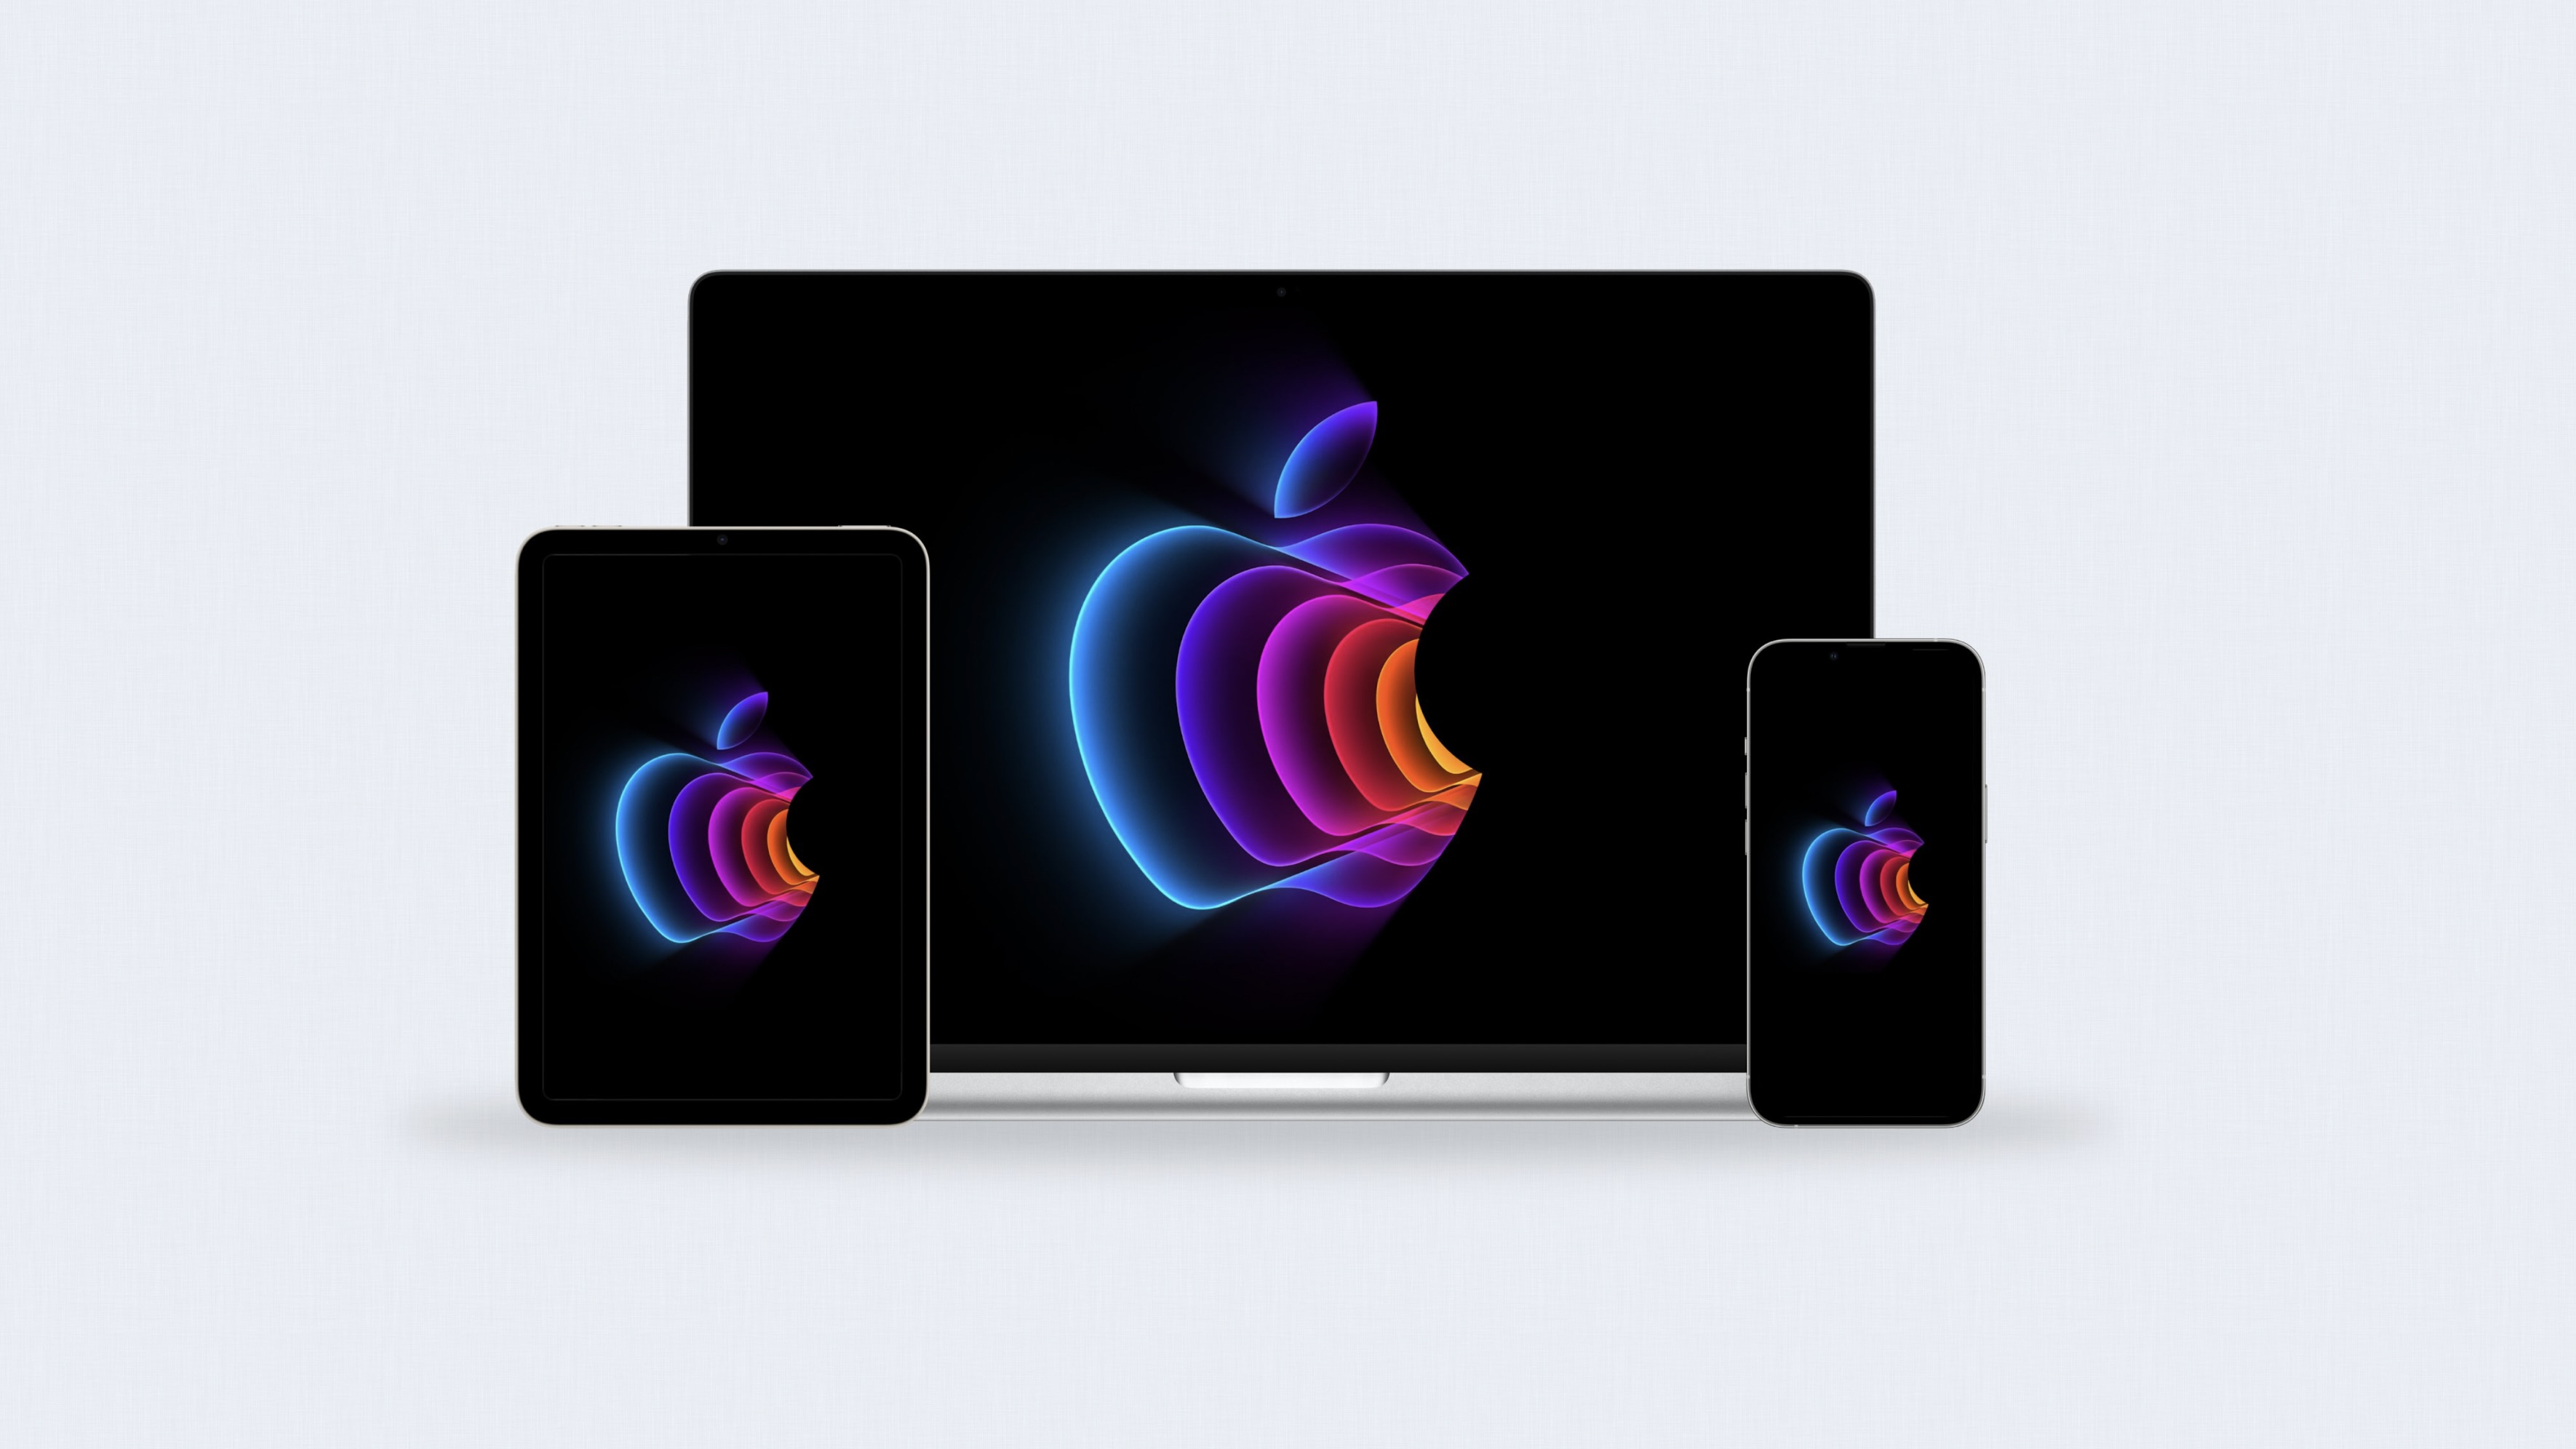 Download the new 2022 MacBook Air wallpapers right here - 9to5Mac